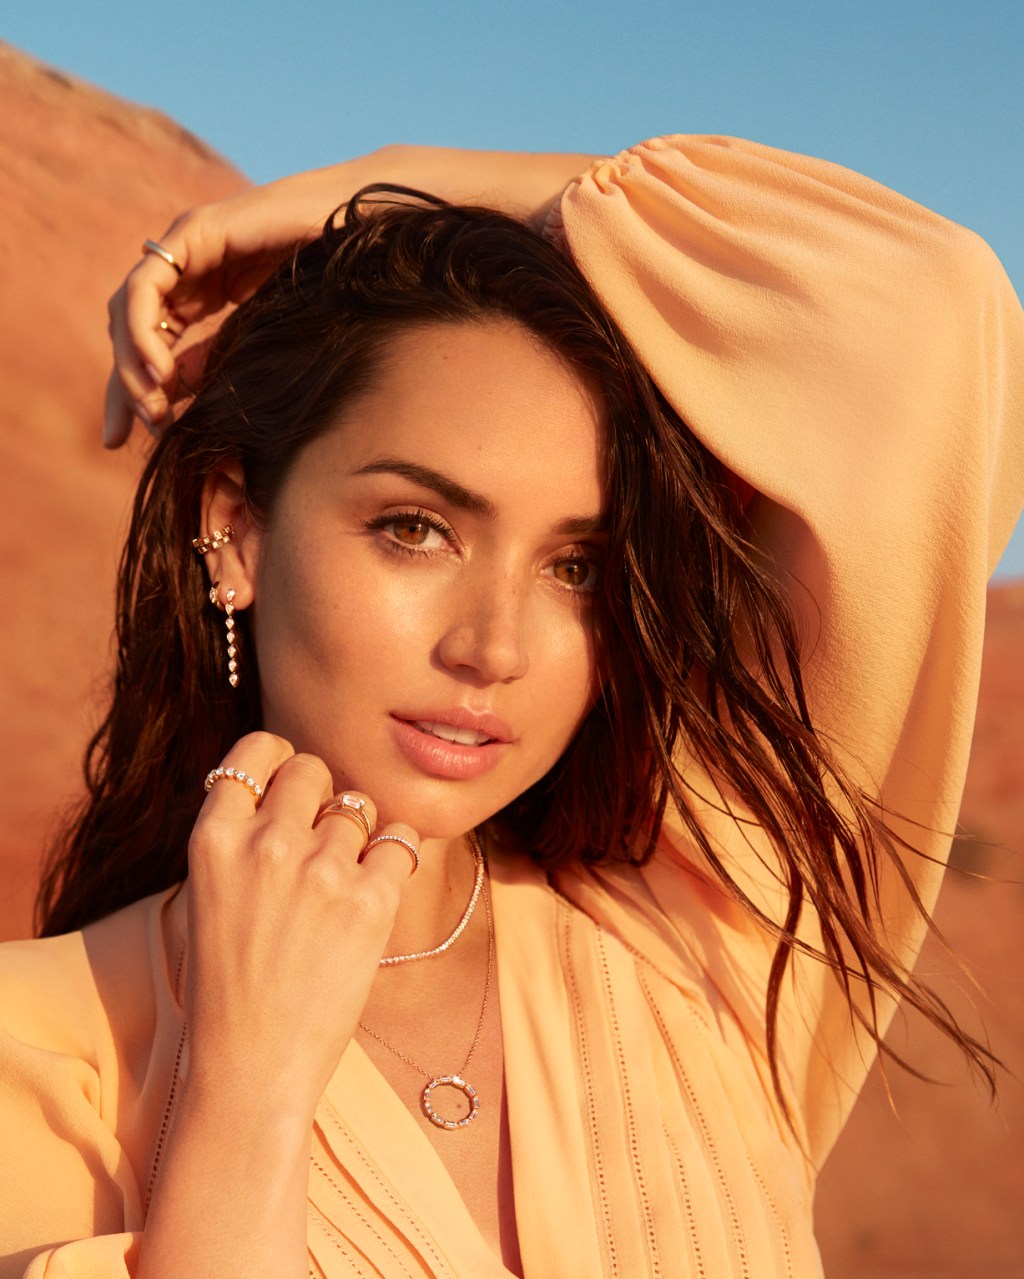 Ana de Armas in "For Moments Like No Other" campaign as a new Global Ambassador of Only Natural Diamonds